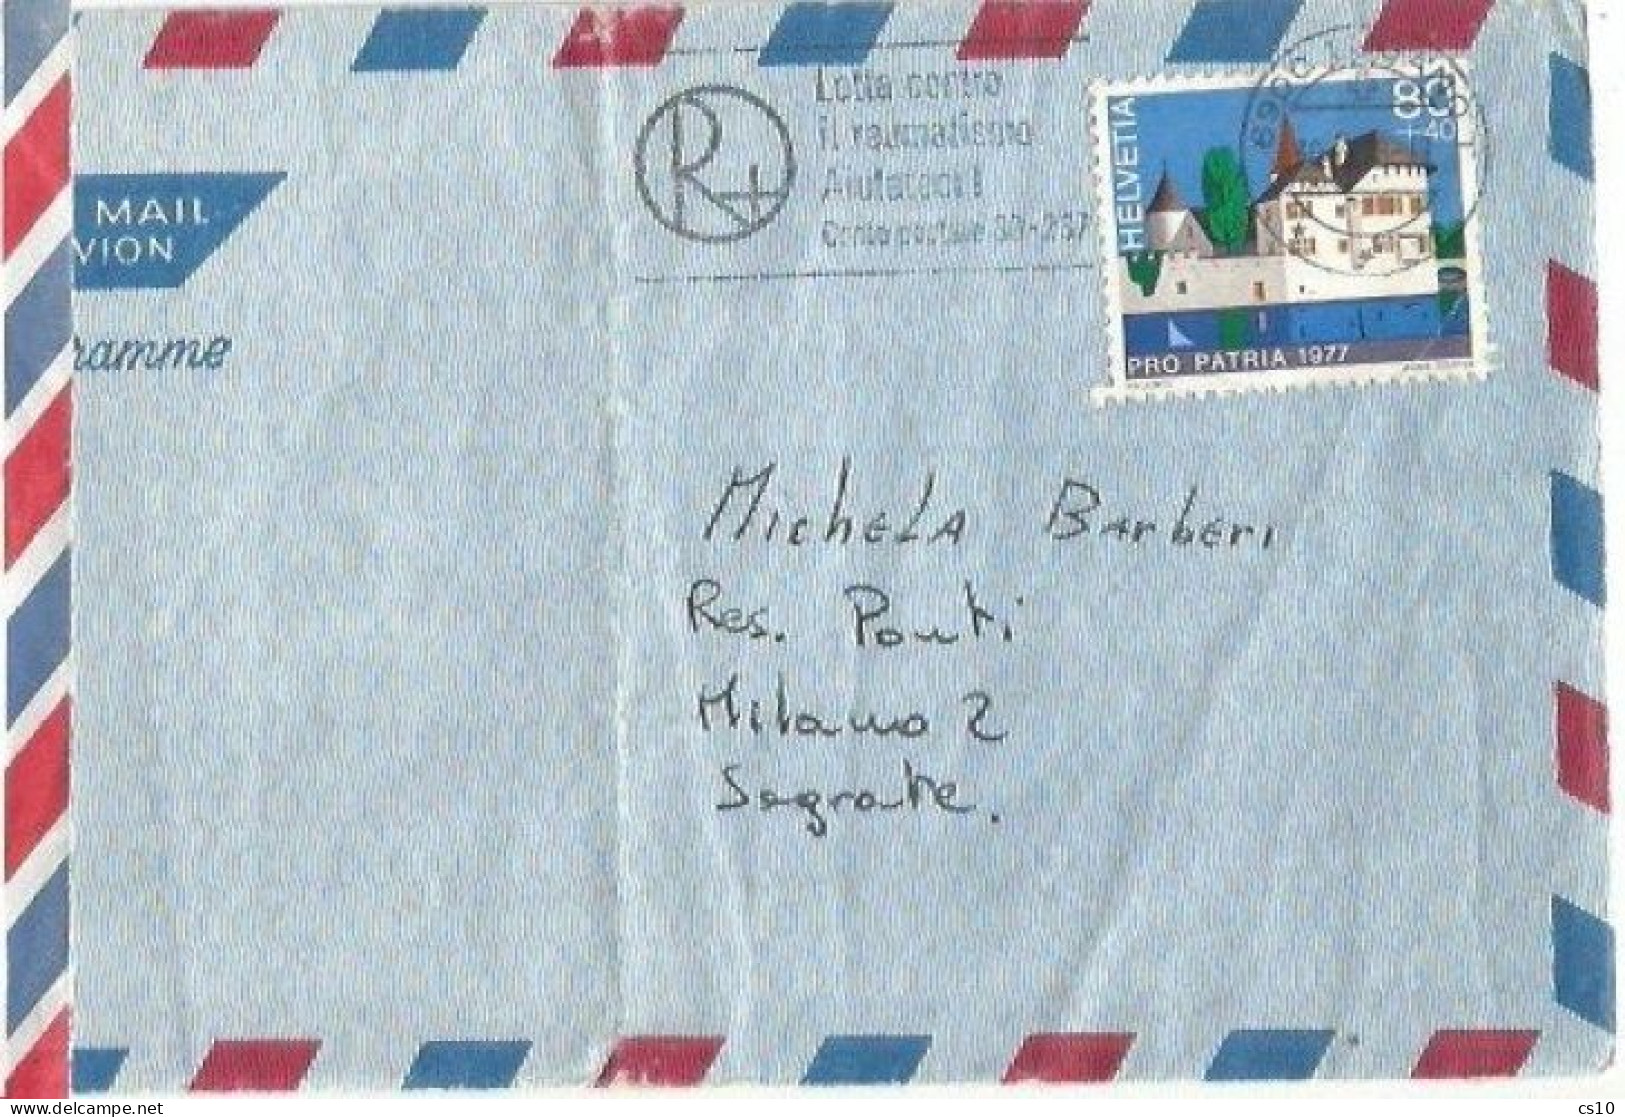 Suisse Airmail Cover Lugano 30aug1978 To Italy With ProPatria 1977 C.80+40 Solo Franking - Cartas & Documentos